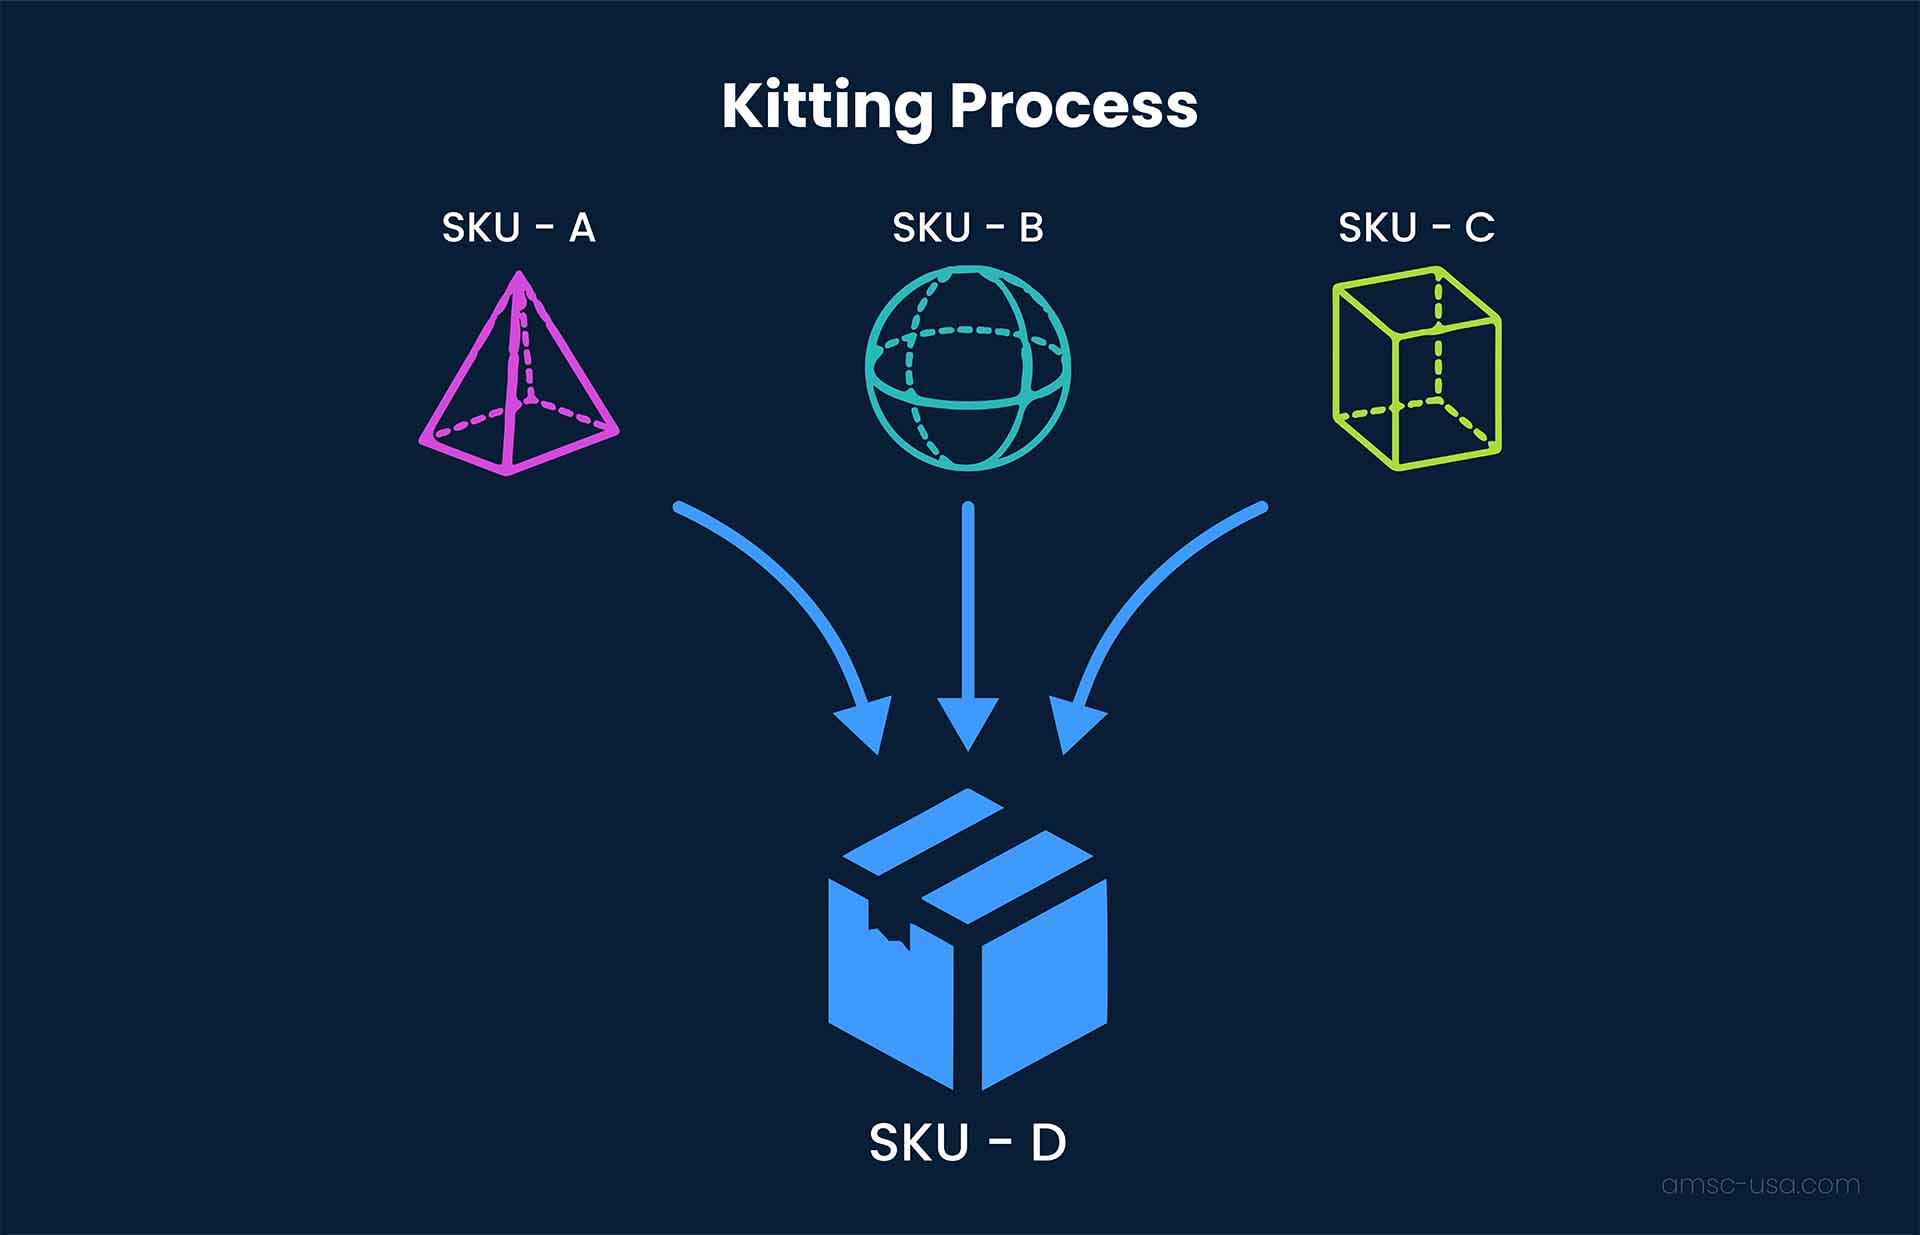 A diagram showing the kitting process